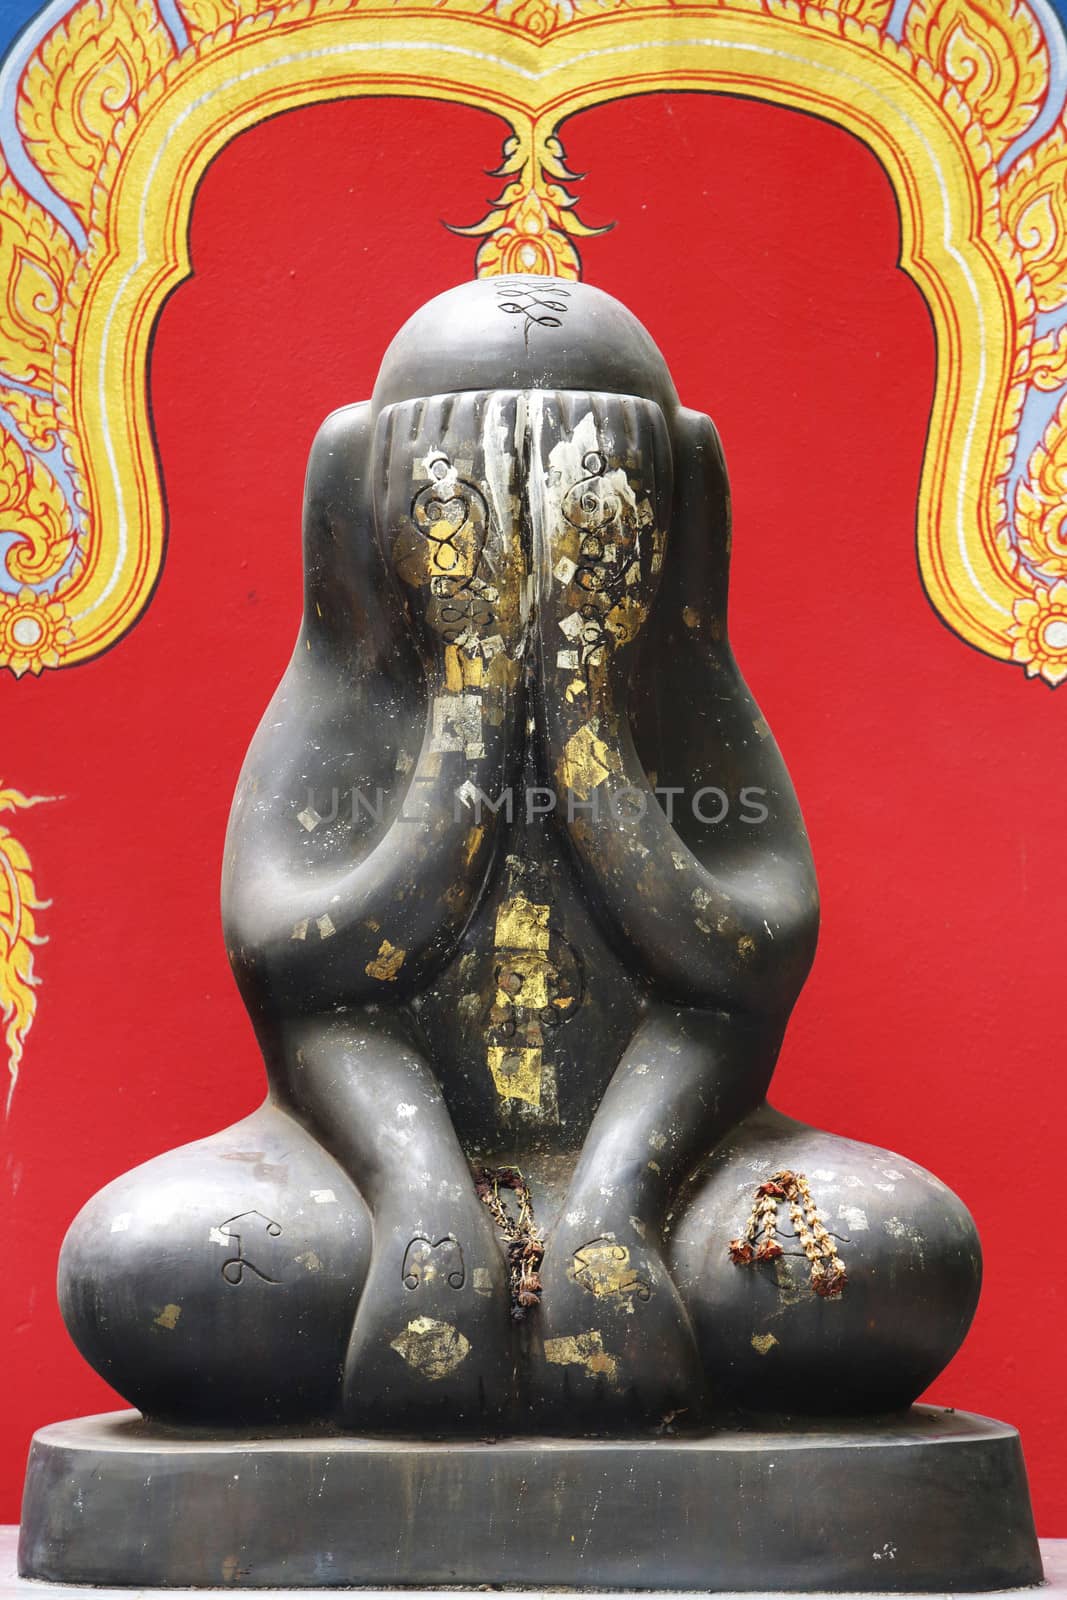 Thai giant amulet called Phra pidta mean closed eyes buddha